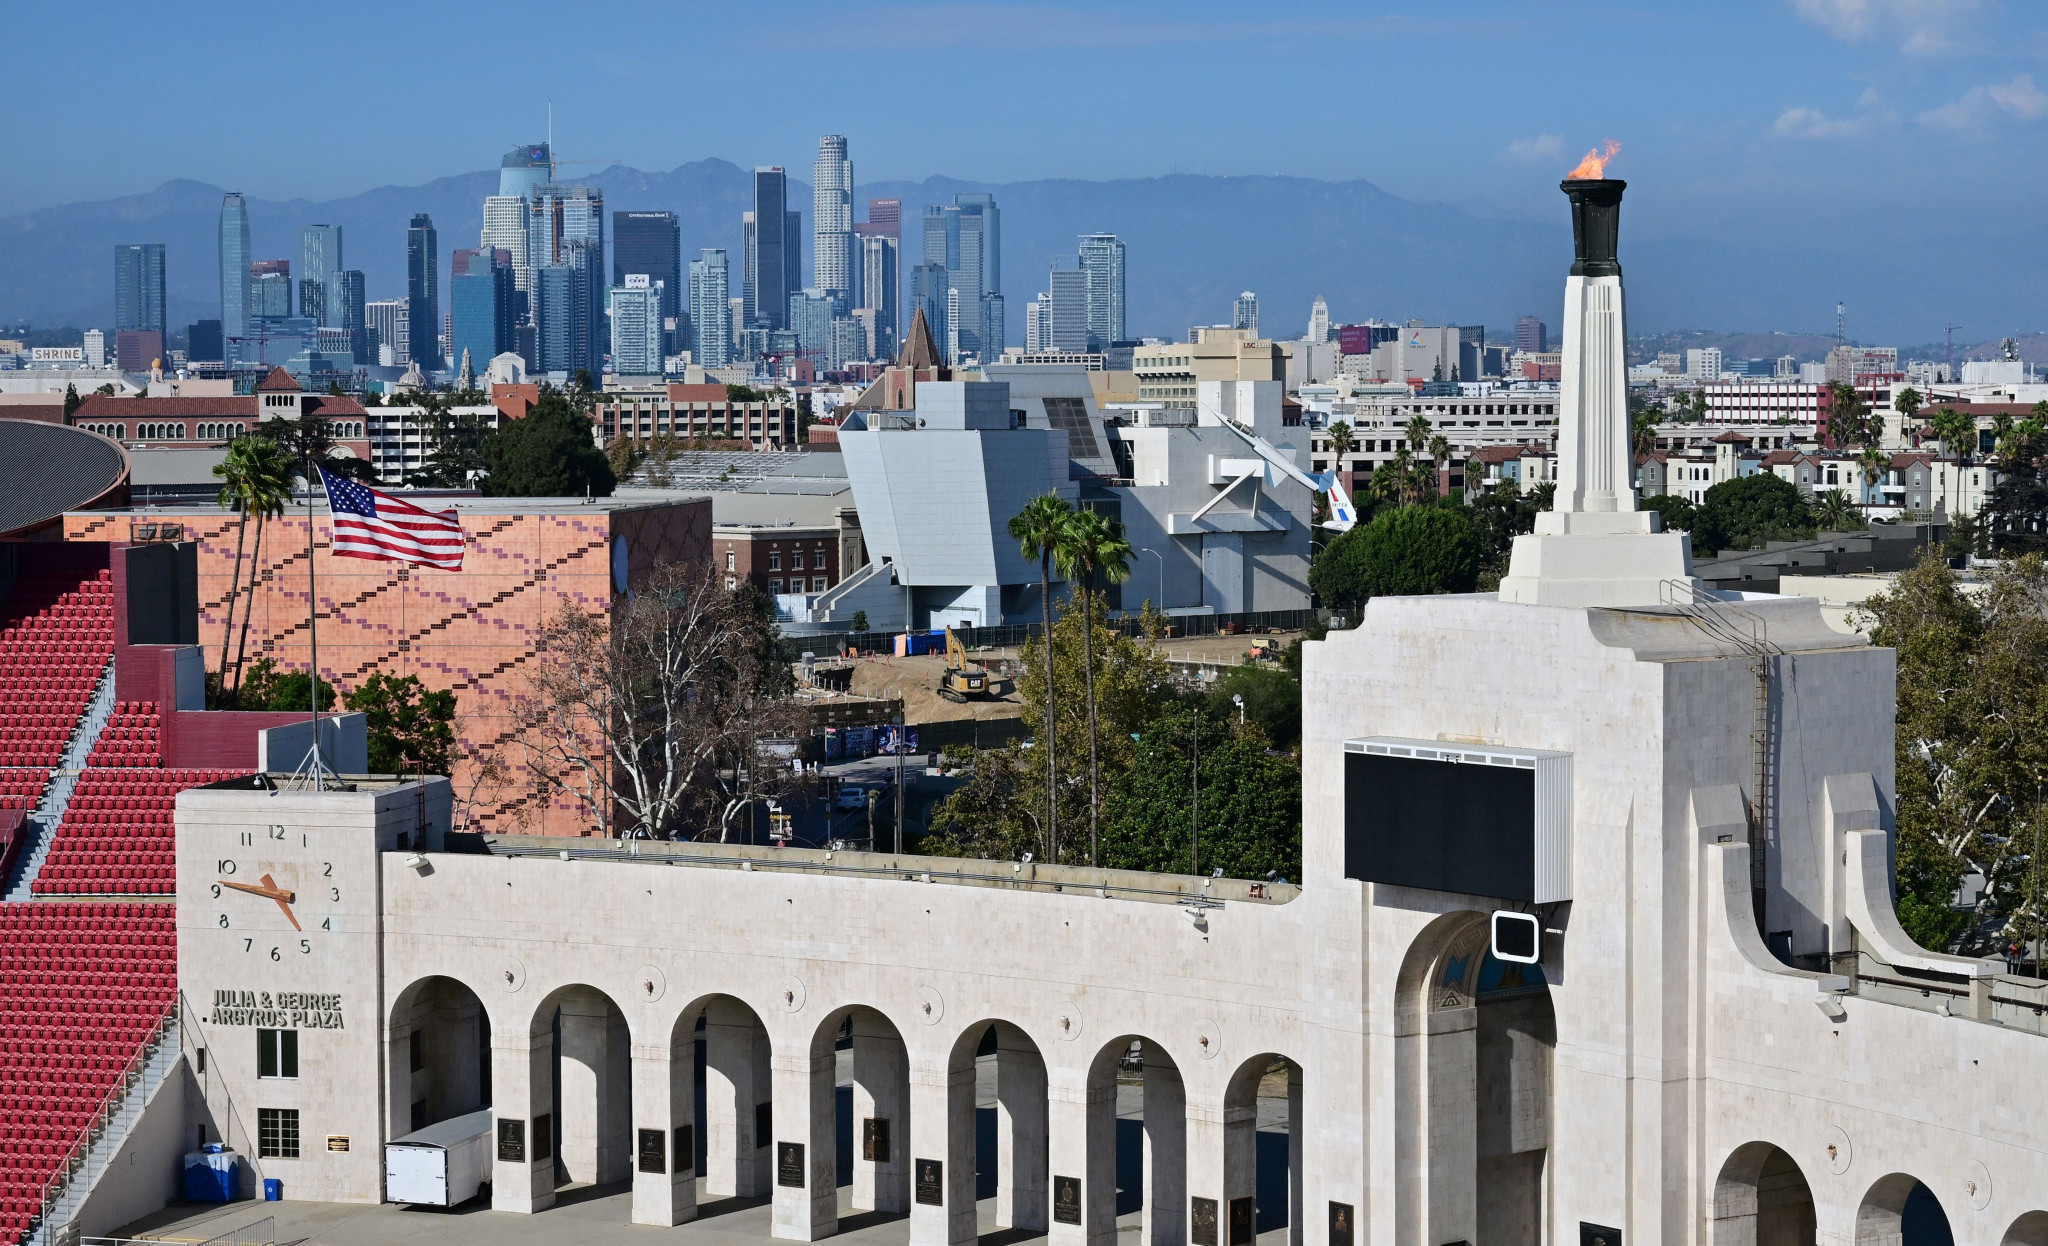 Los Angeles is set to host the Olympic and Paralympic Games in 2028 ©Getty Images